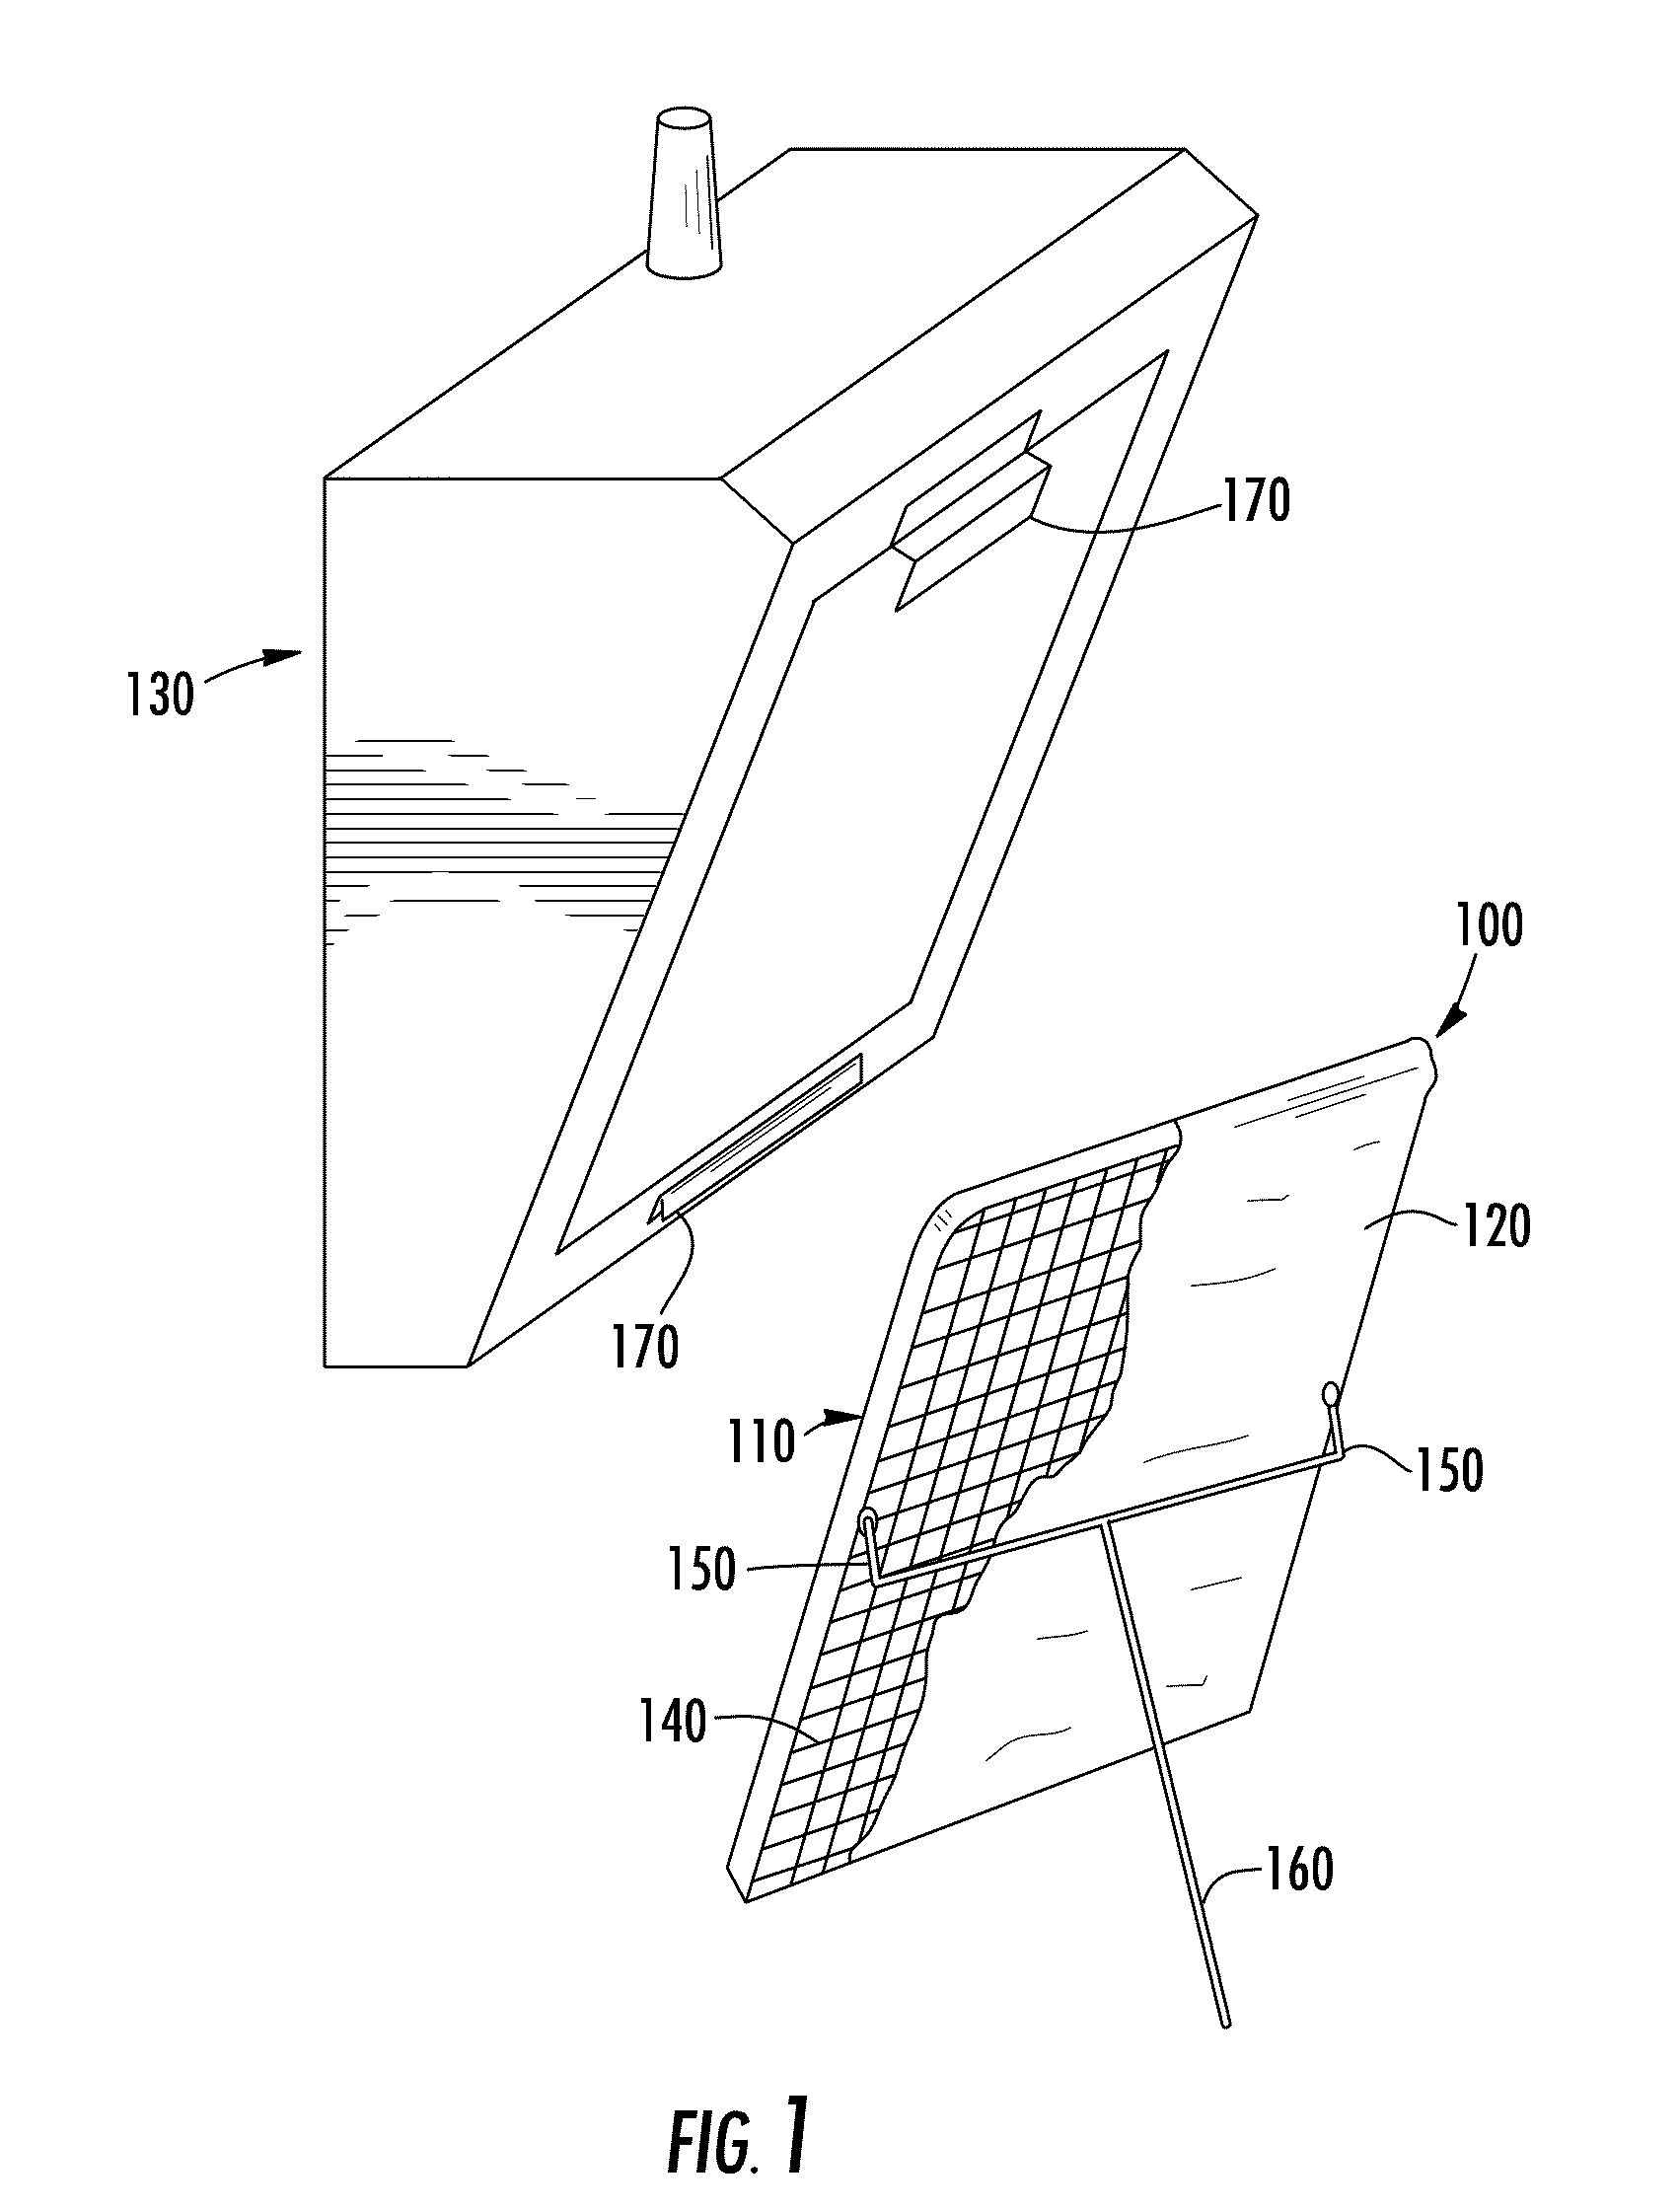 Disposable grease filter for air filtration system and method of manufacturing same